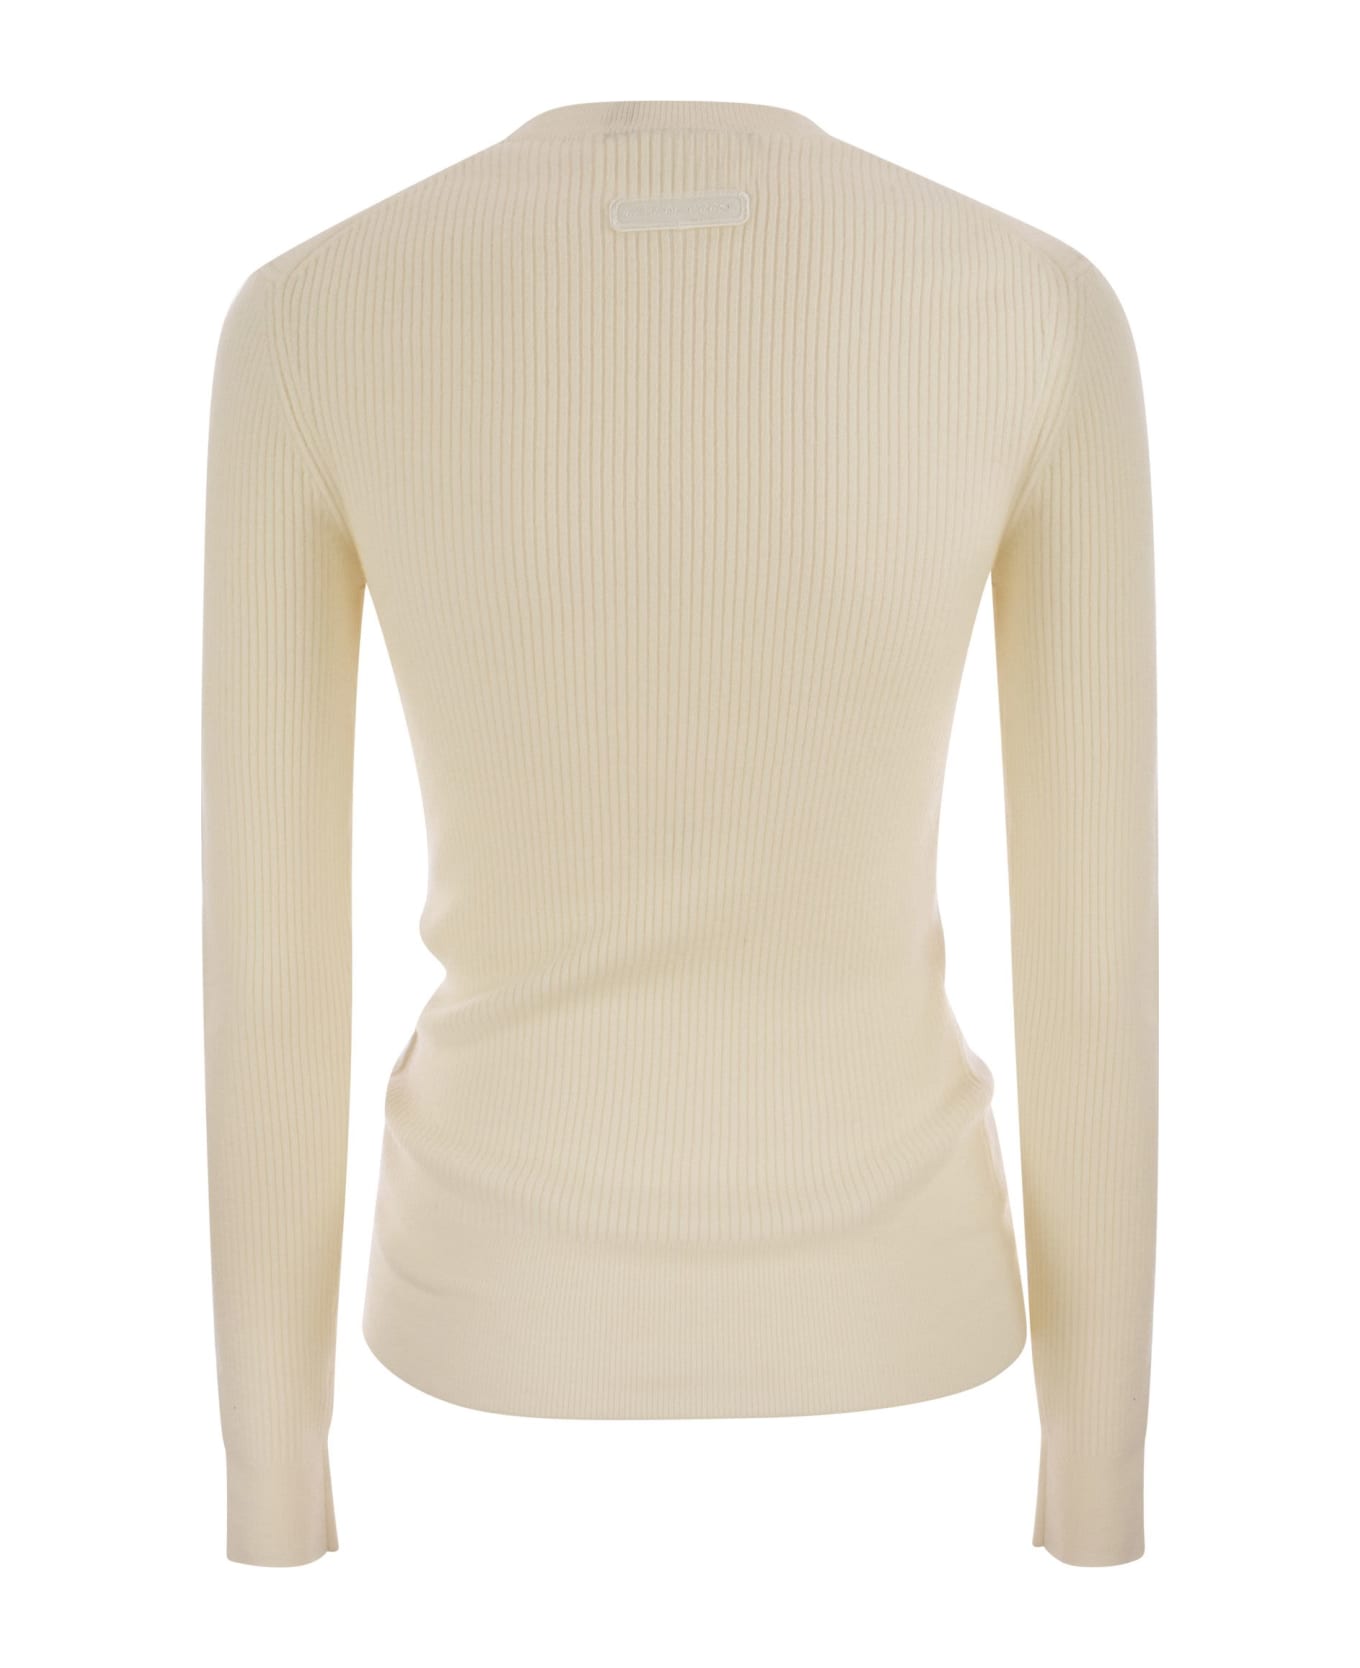 Canada Goose Crew-neck Jumper In Wool - Ivory